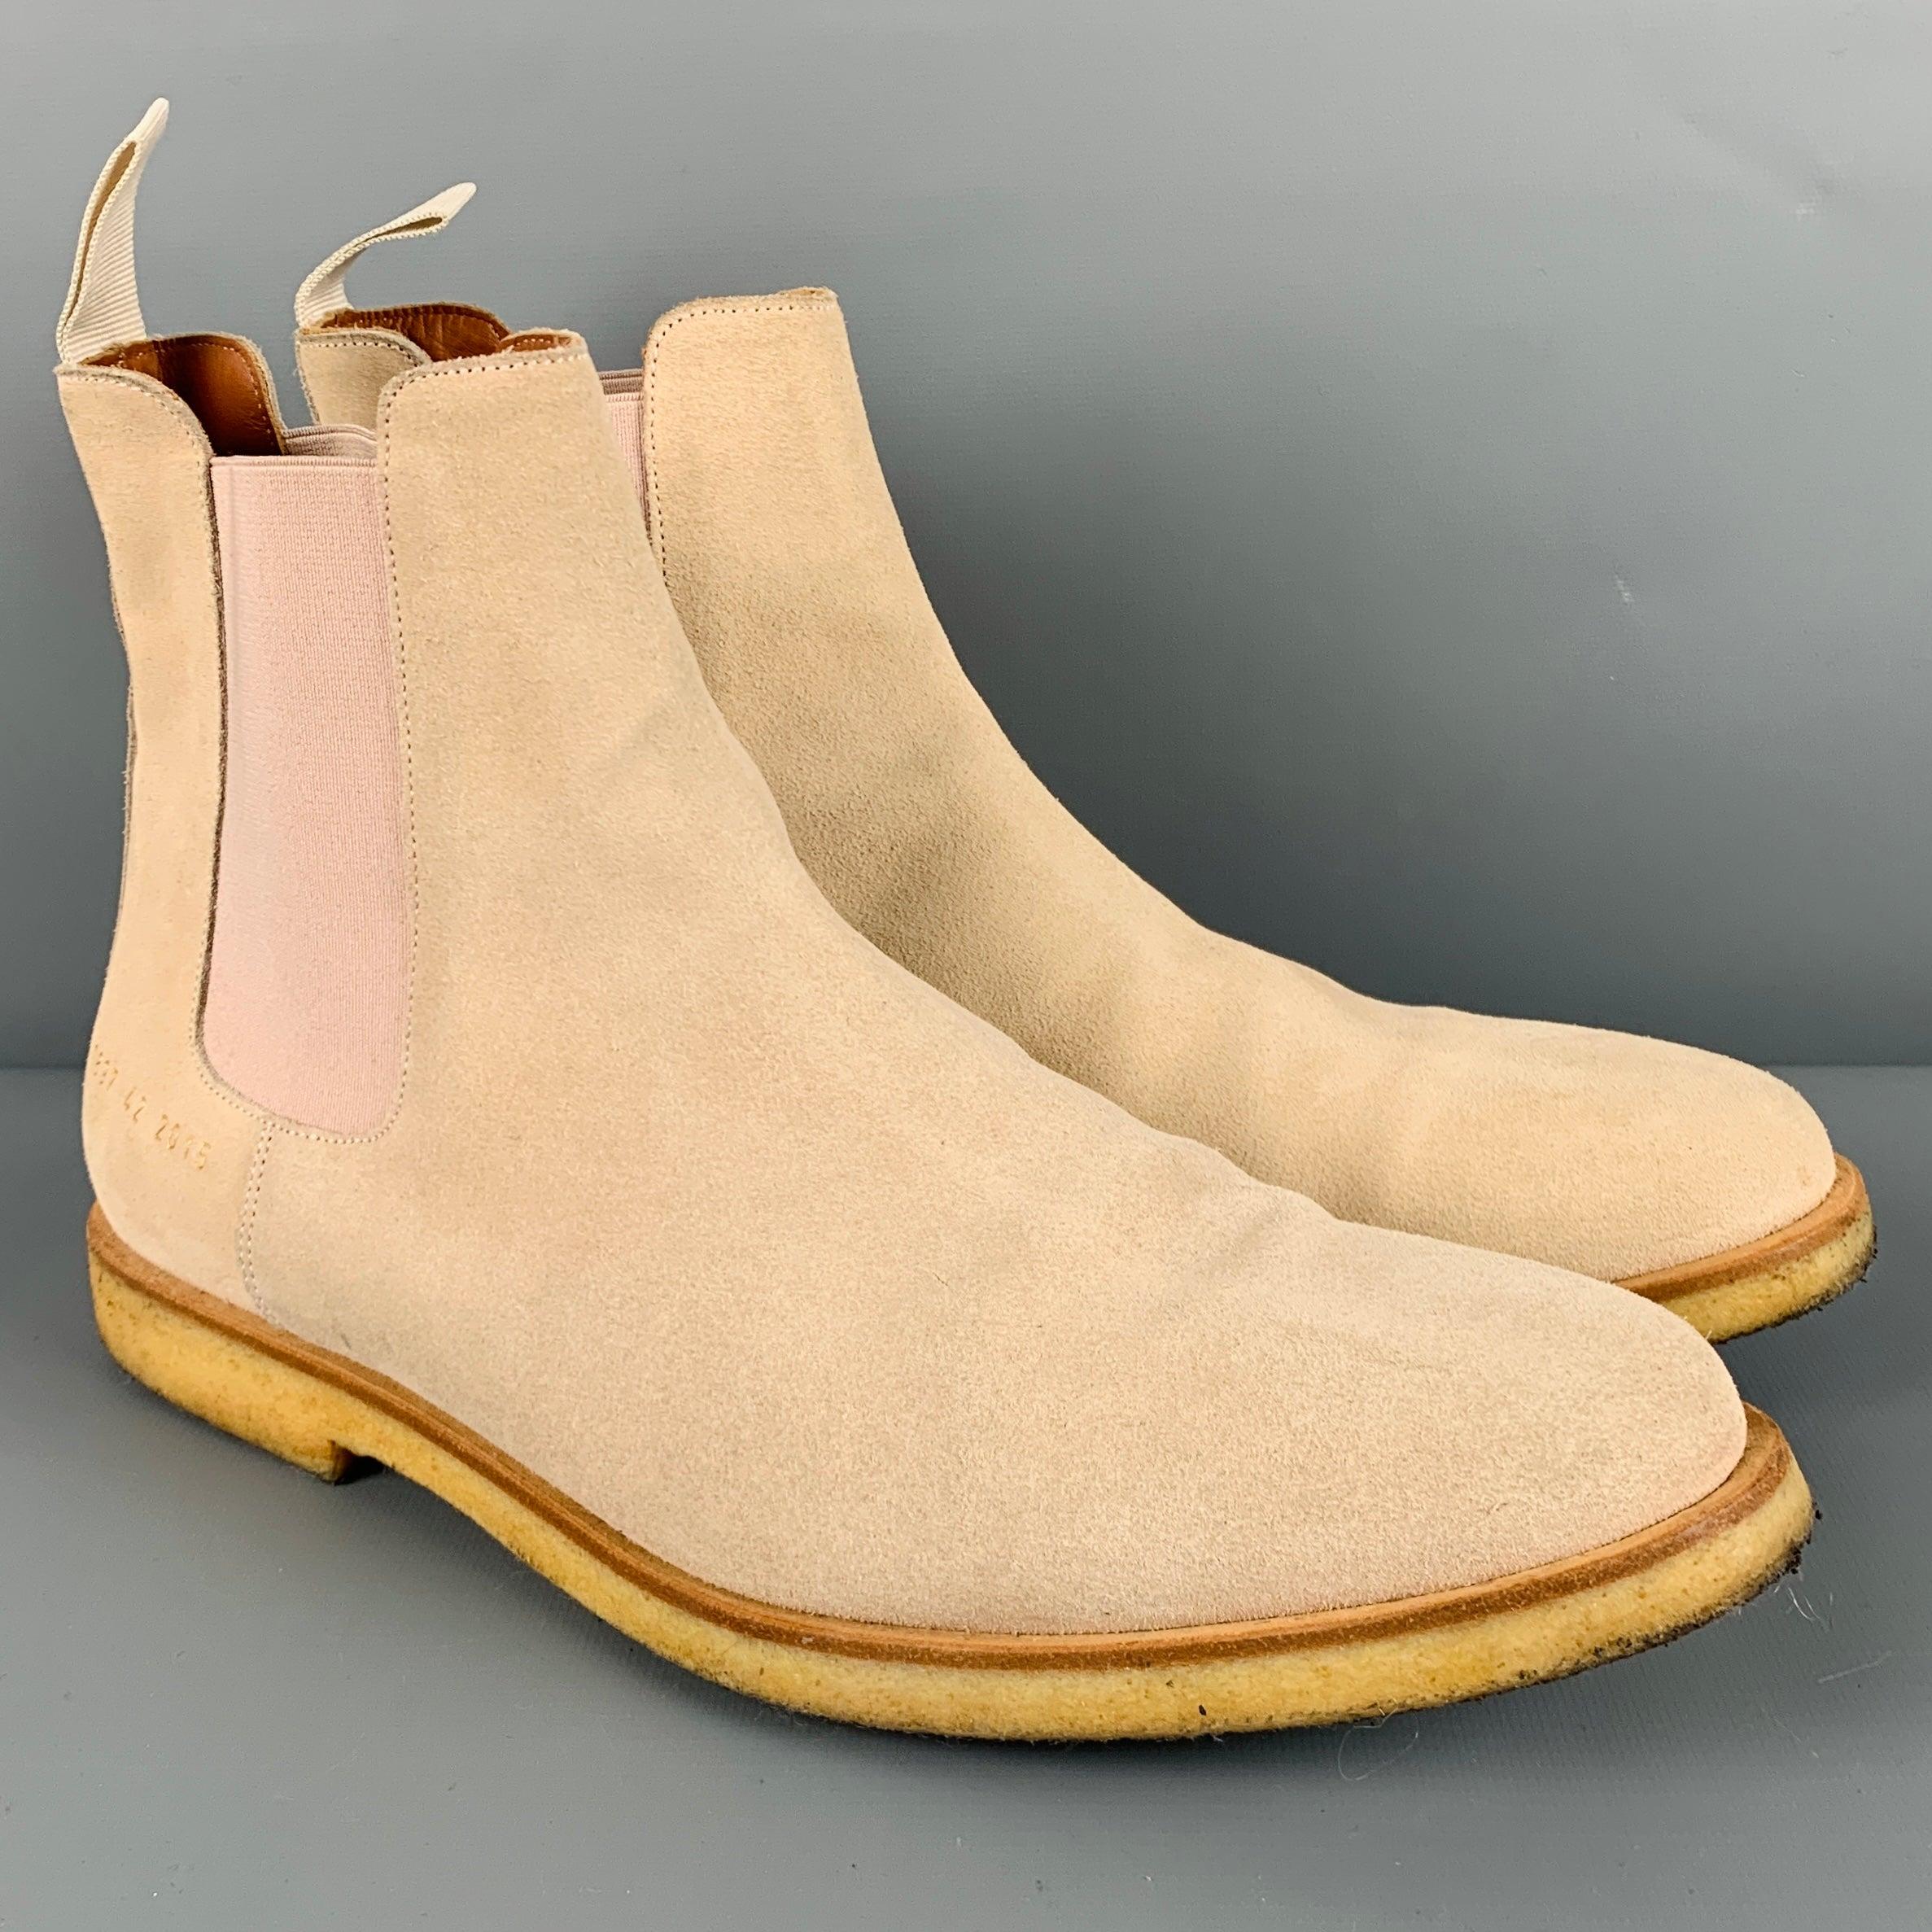 COMMON PROJECTS
boots in a beige suede fabric featuring a Chelsea style with elastic panels, rubber sole, and pull on closure. Made in Italy.Excellent Pre-Owned Condition. 

Marked:   1897 42 2015 

Measurements: 
  Length: 11.75 inches Width: 4.25